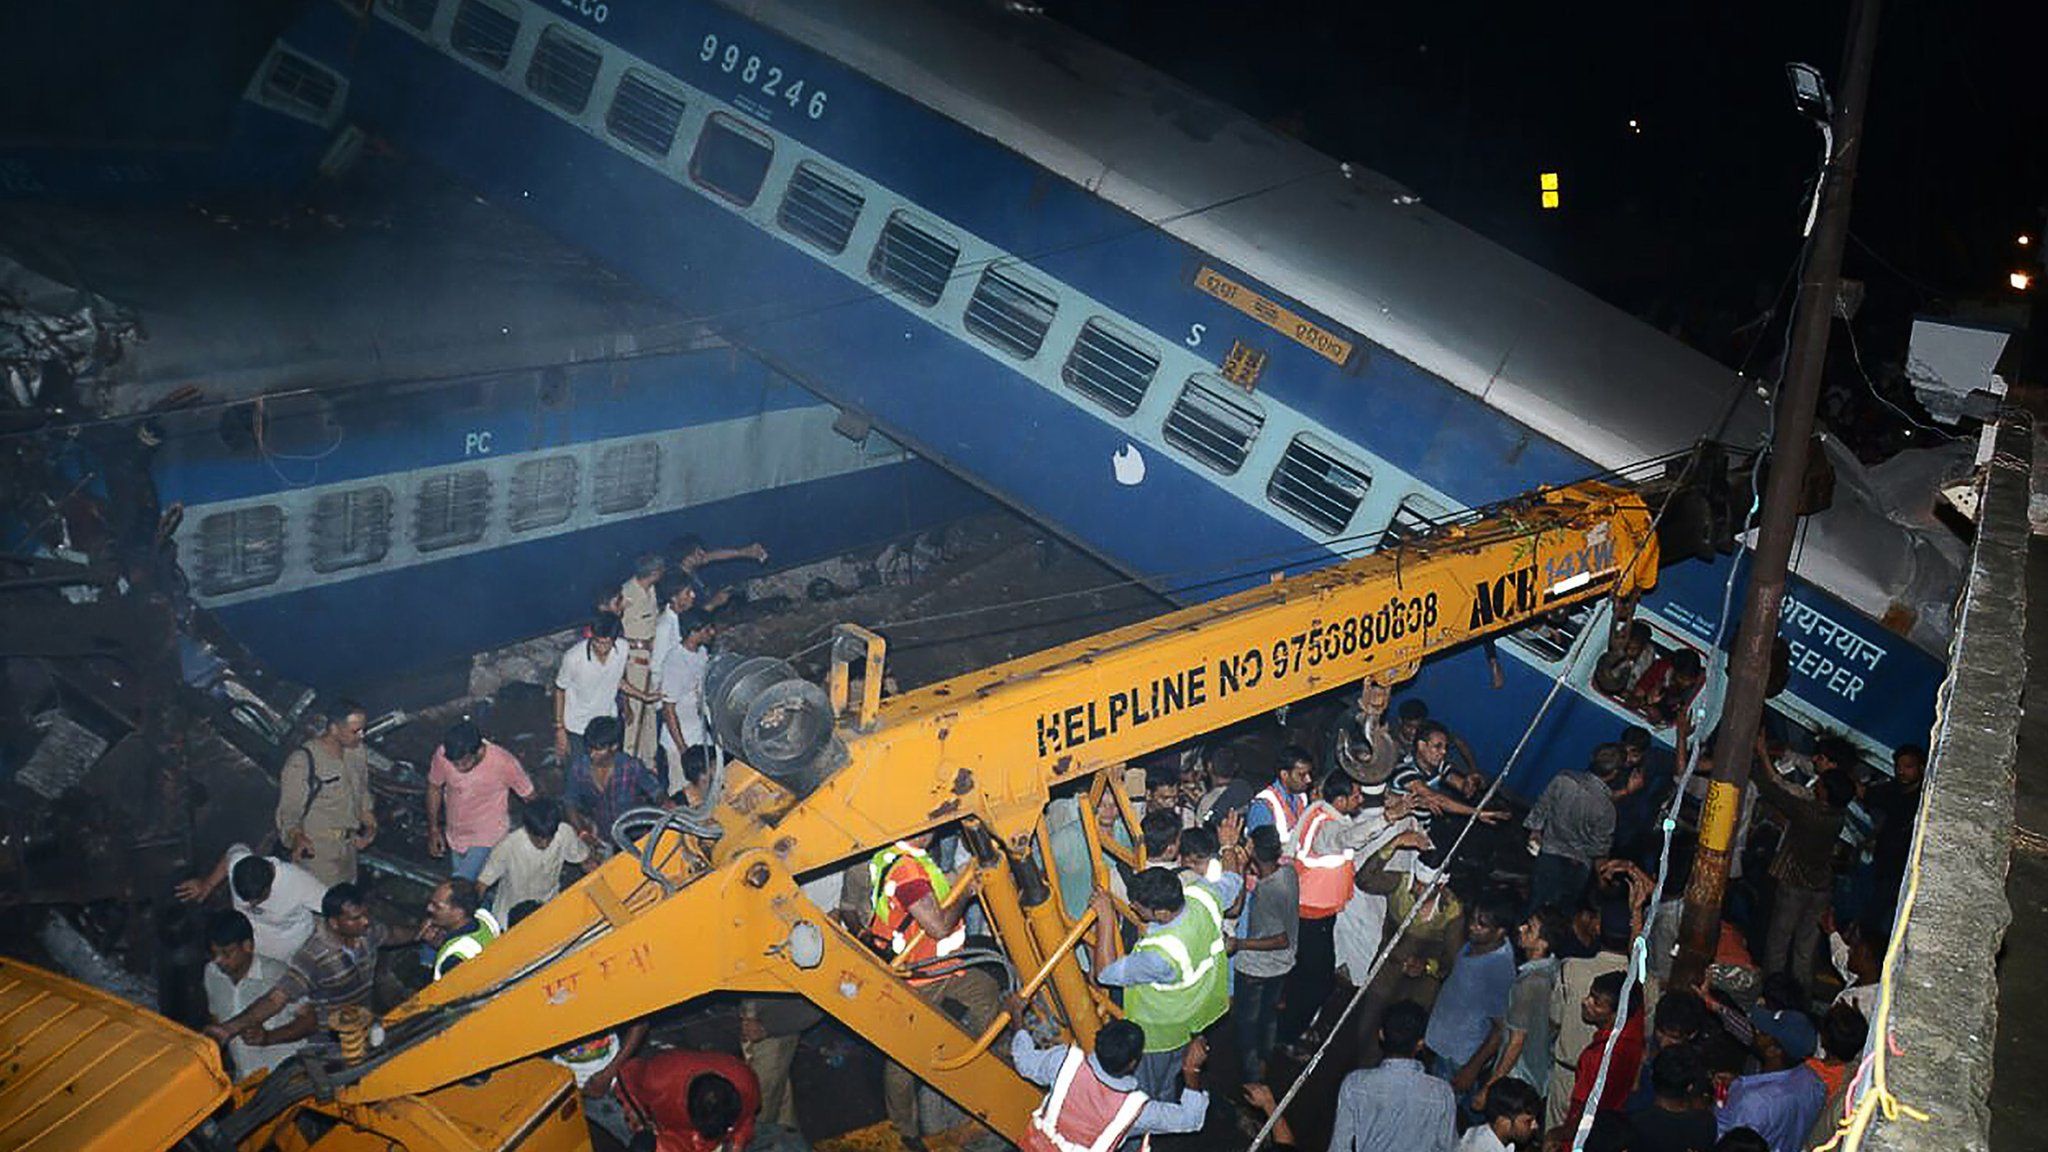 Emergency workers look for survivors on the wreckage of a train carriage after a train derailed in the Indian state of Uttar Pradesh on August 19, 2017